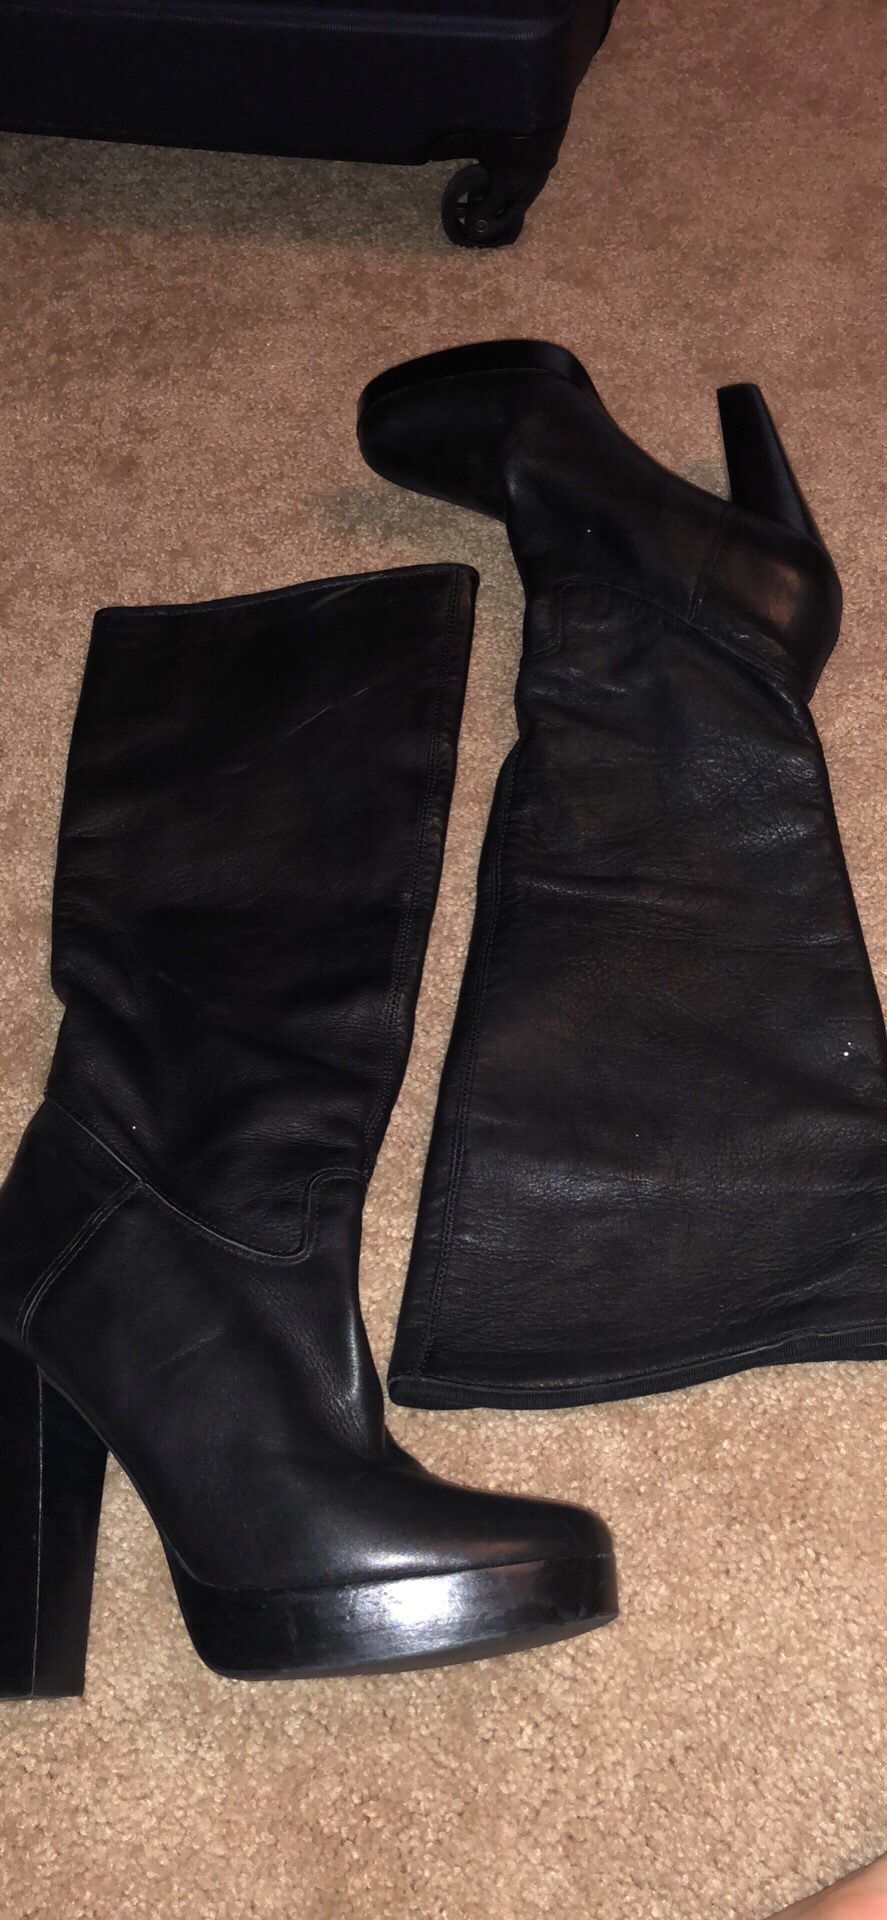 Leather knee high Aldo boots 7.5